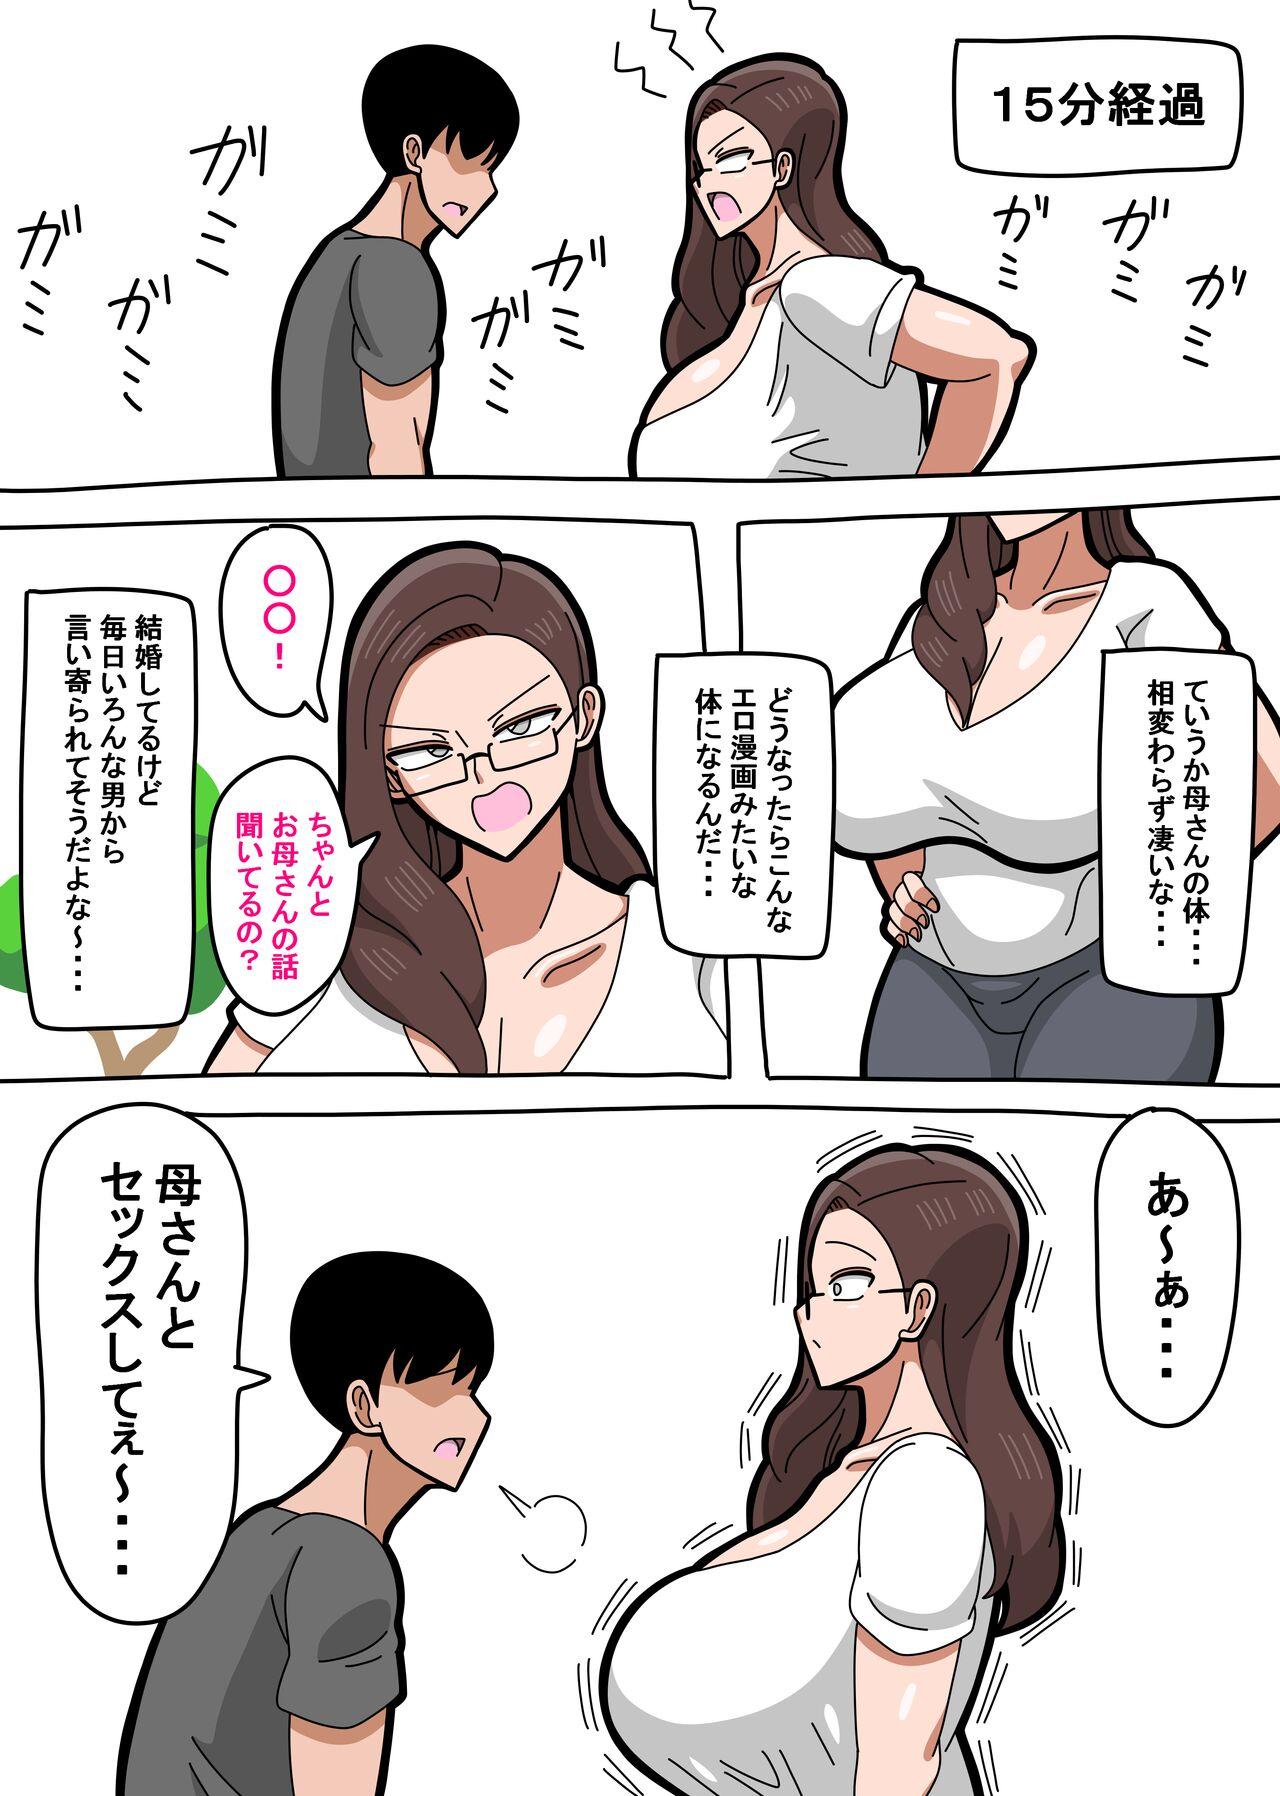 Foot 母さんは女社長 - Original Young - Page 4